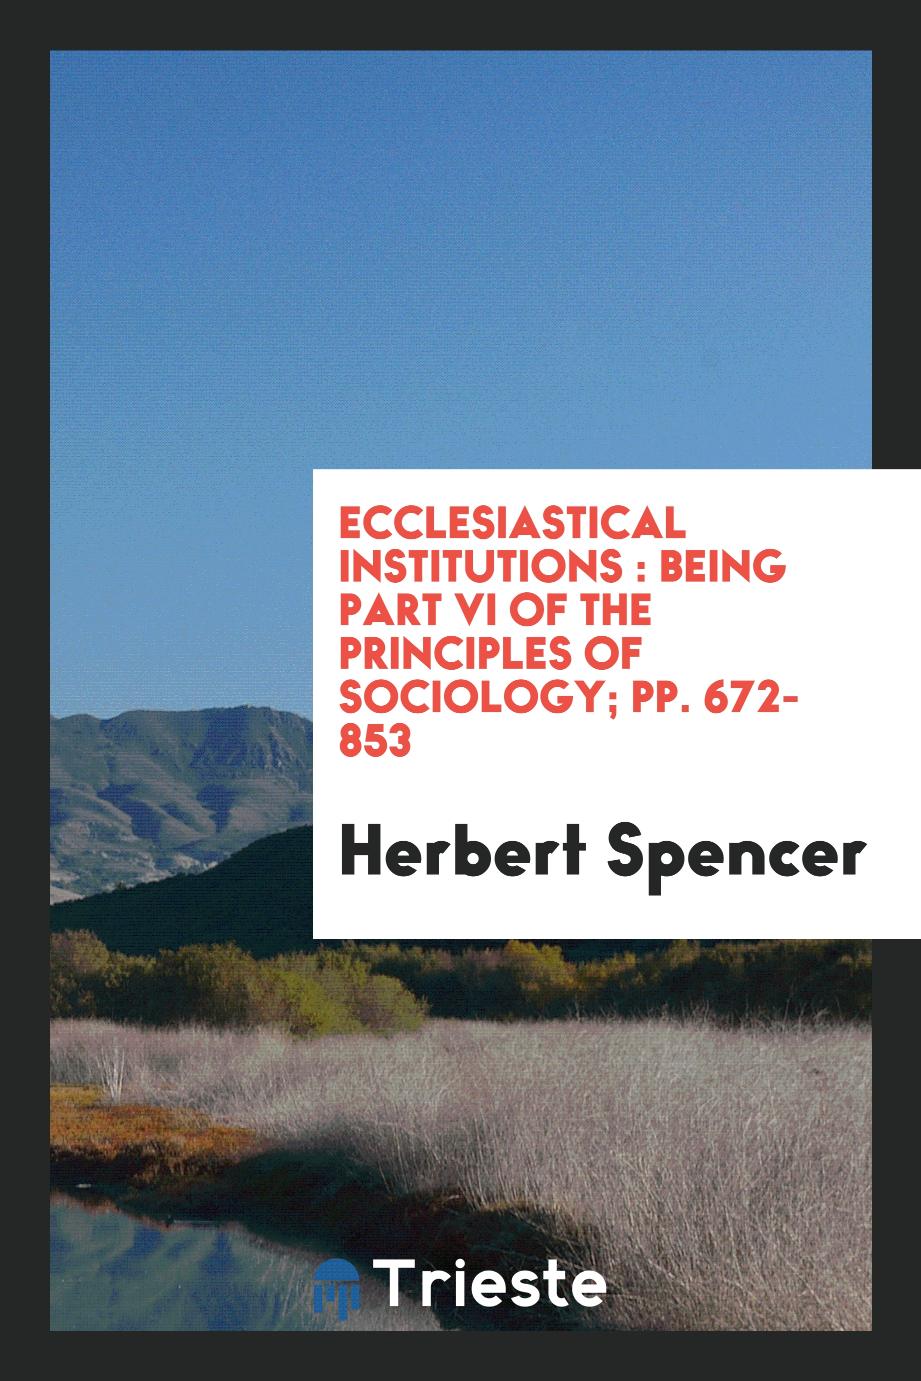 Ecclesiastical institutions : being part VI of the Principles of sociology; pp. 672-853